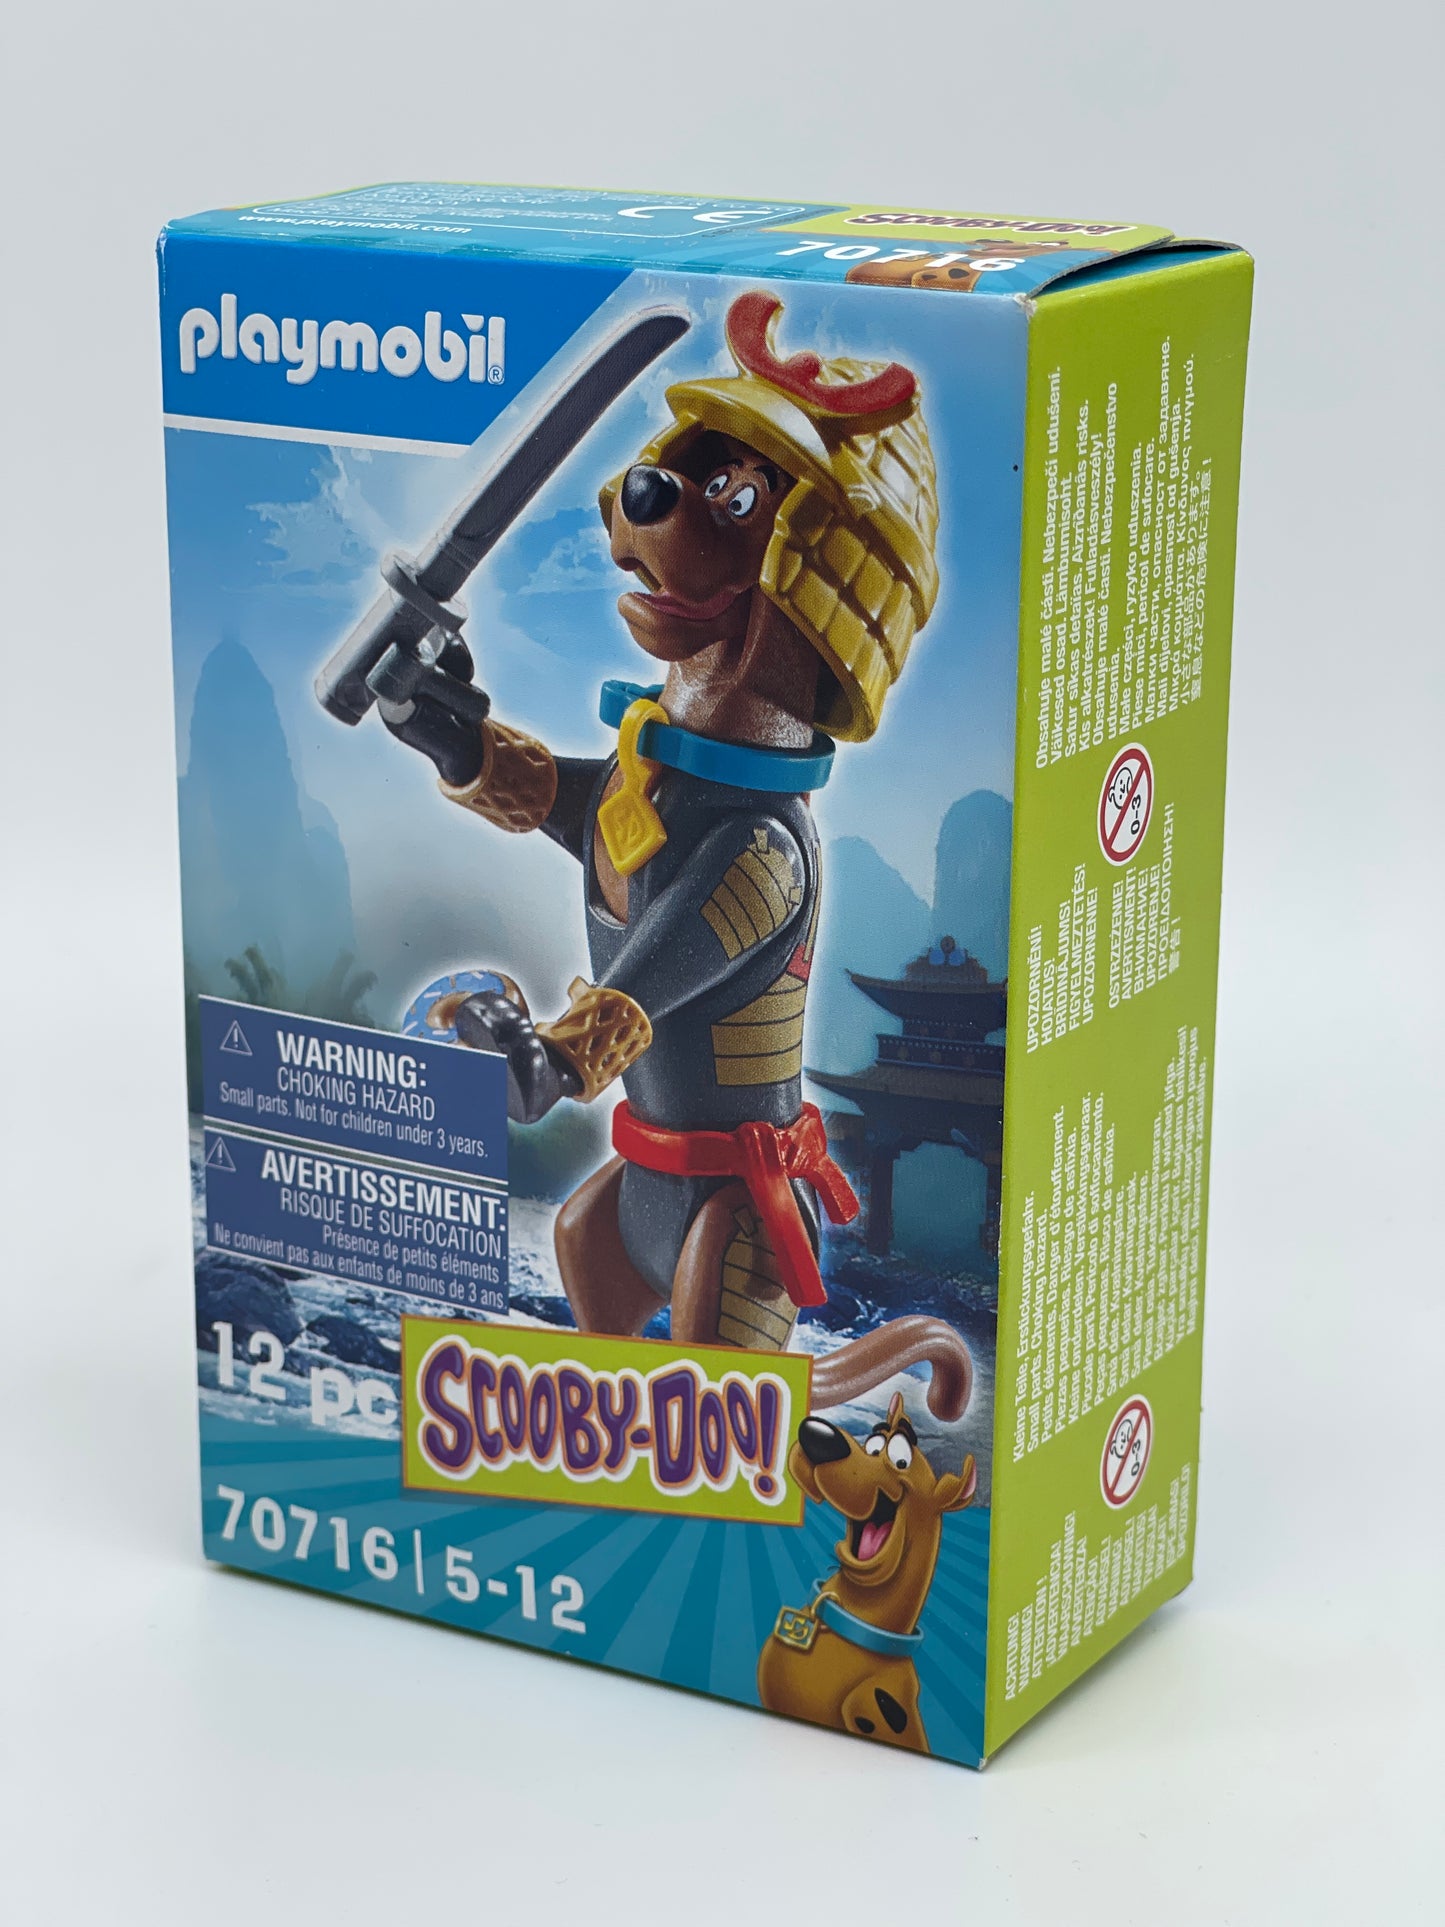 Playmobil "Samurai" Scooby Doo with Accessories 70716 (2021) 